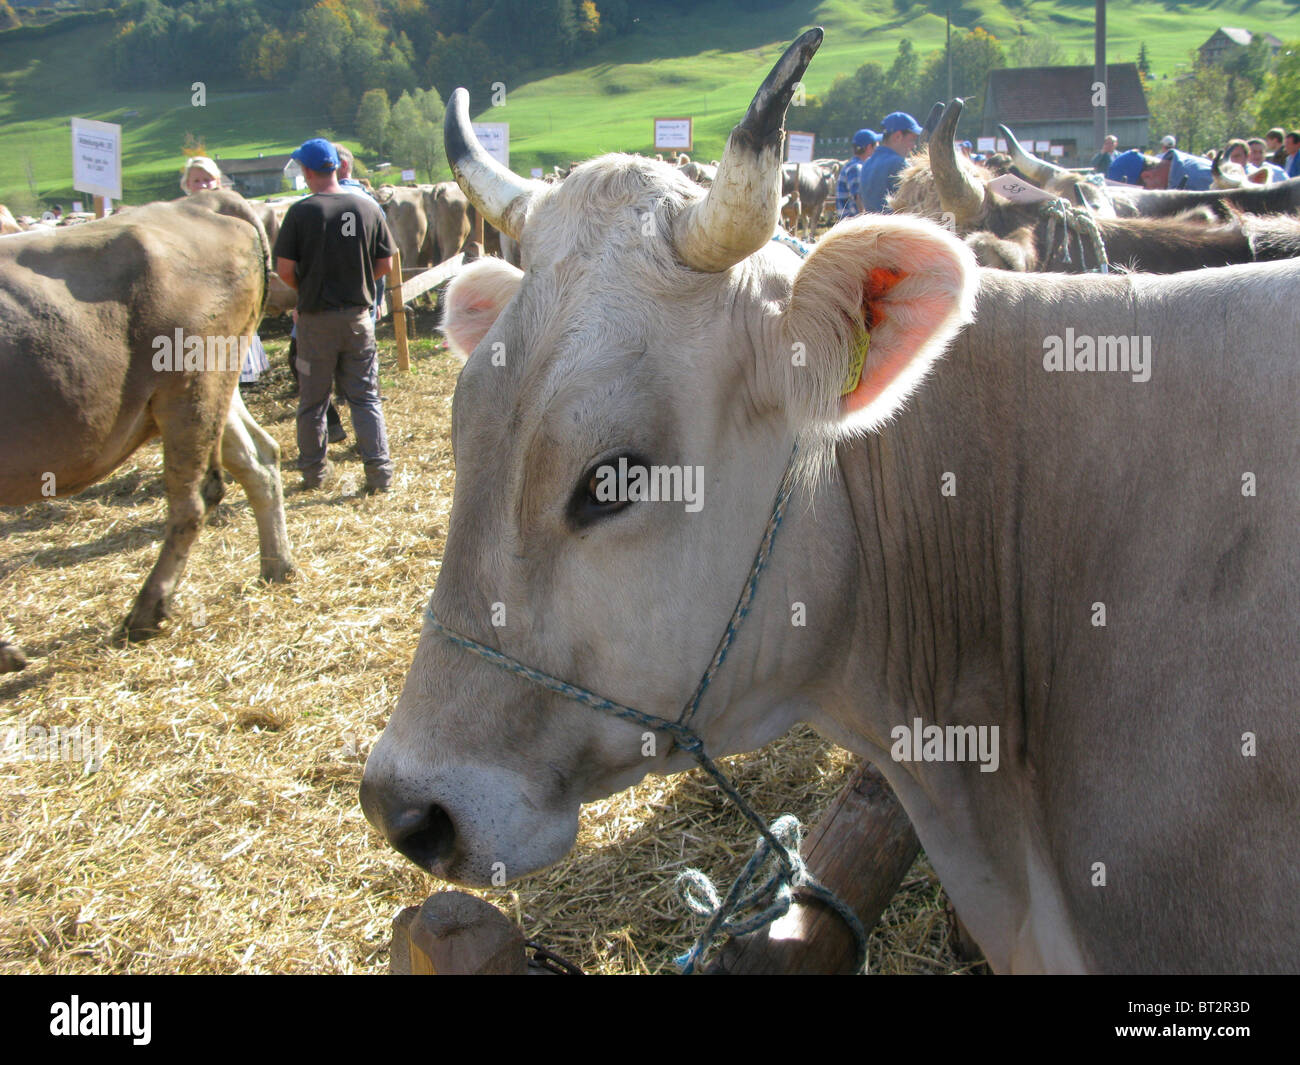 cows Switzerland cattle agricultural fair Stock Photo